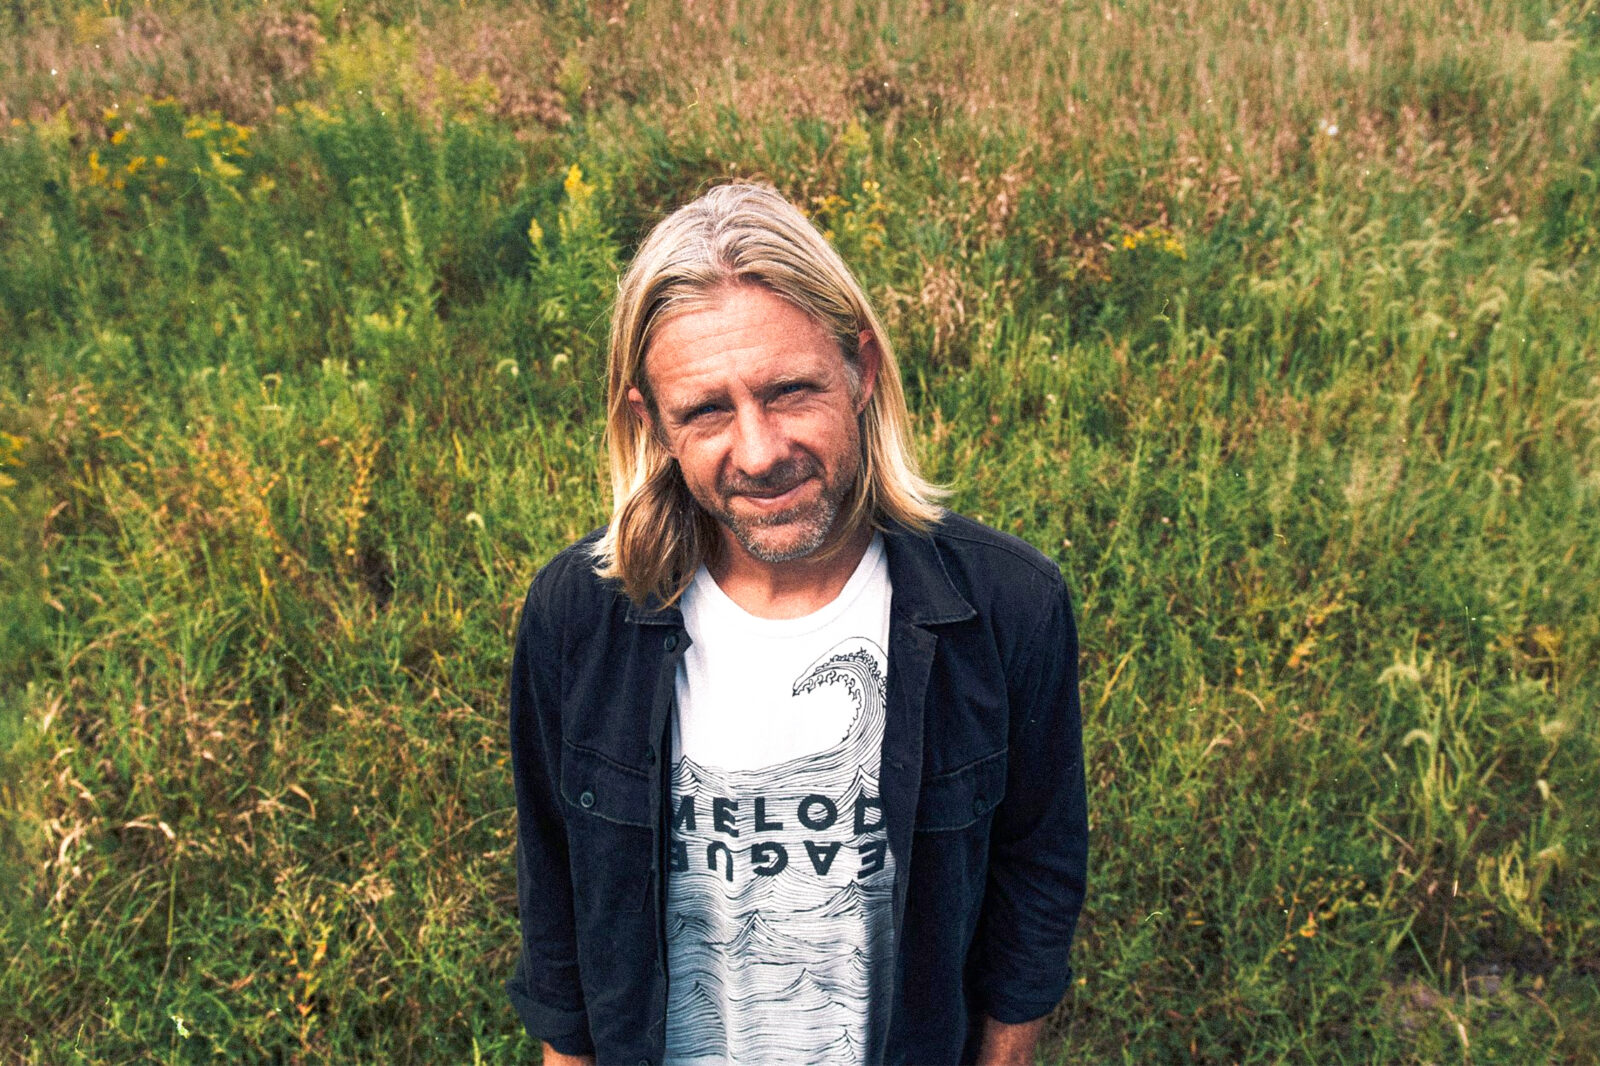 Jon Foreman on Confronting Your 'Dark Places' - RELEVANT